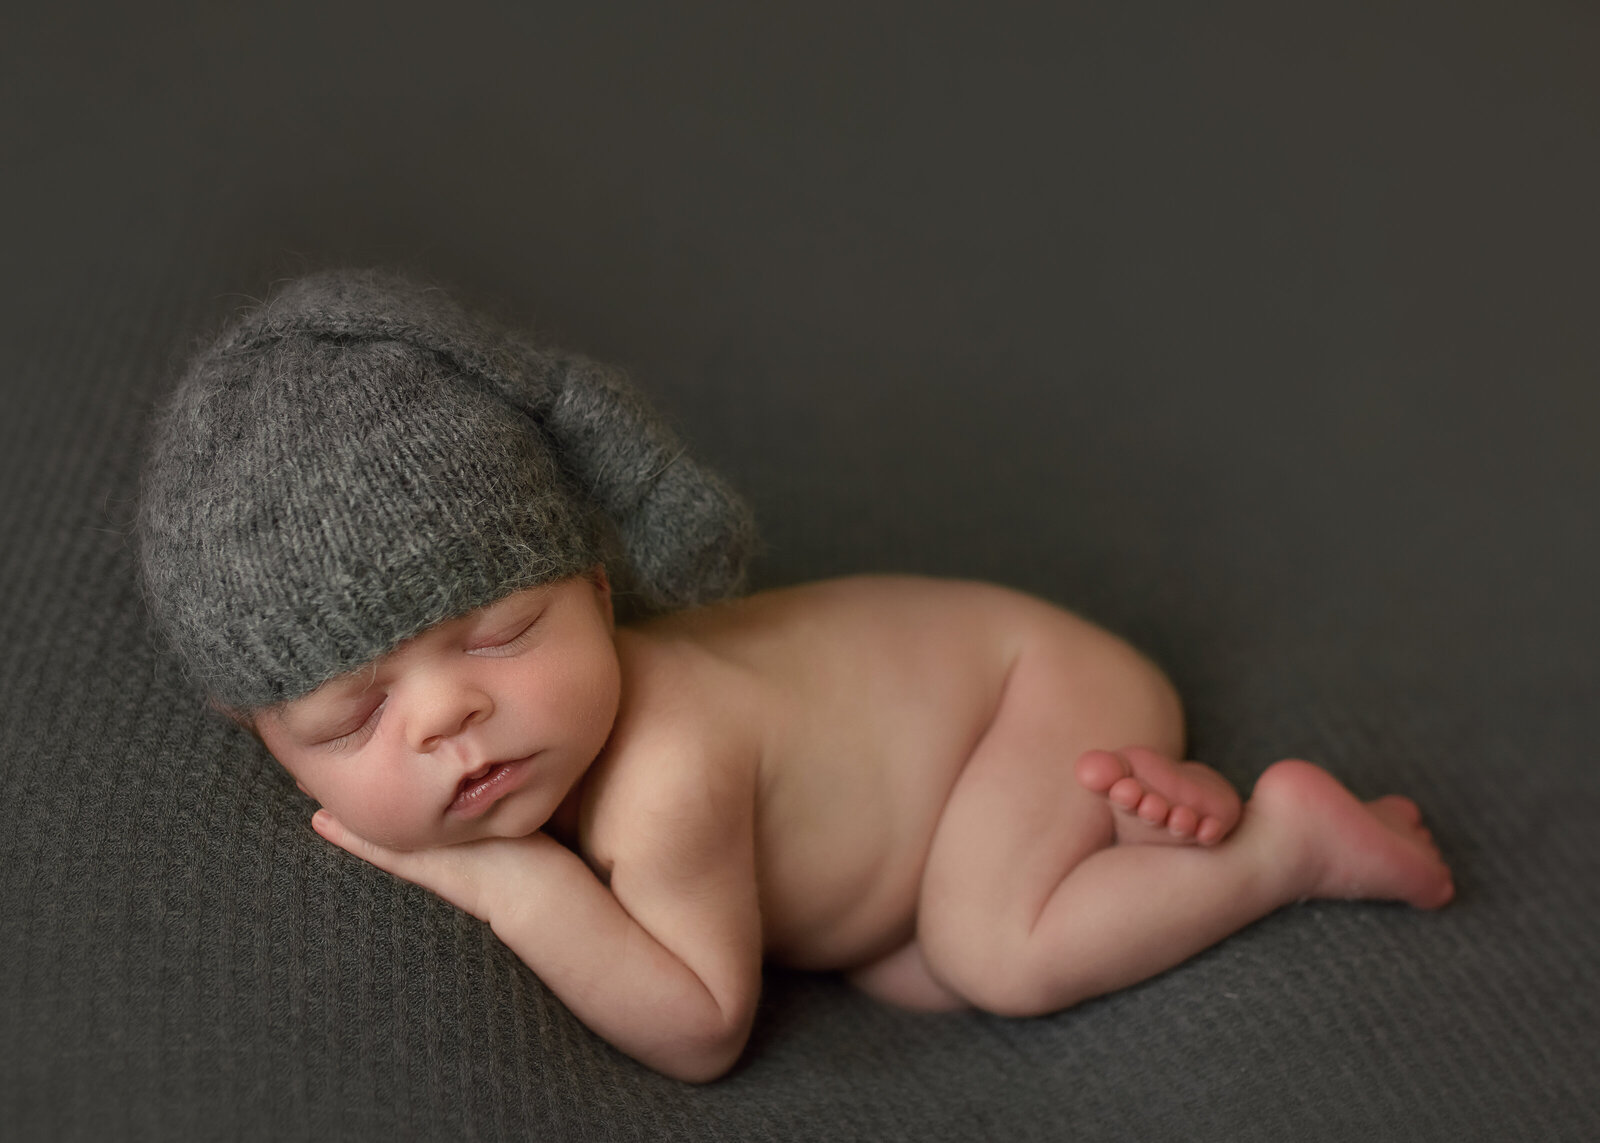 sleeping newborn baby boy laying on his stomach on a gray background with a gray sleeper cap on